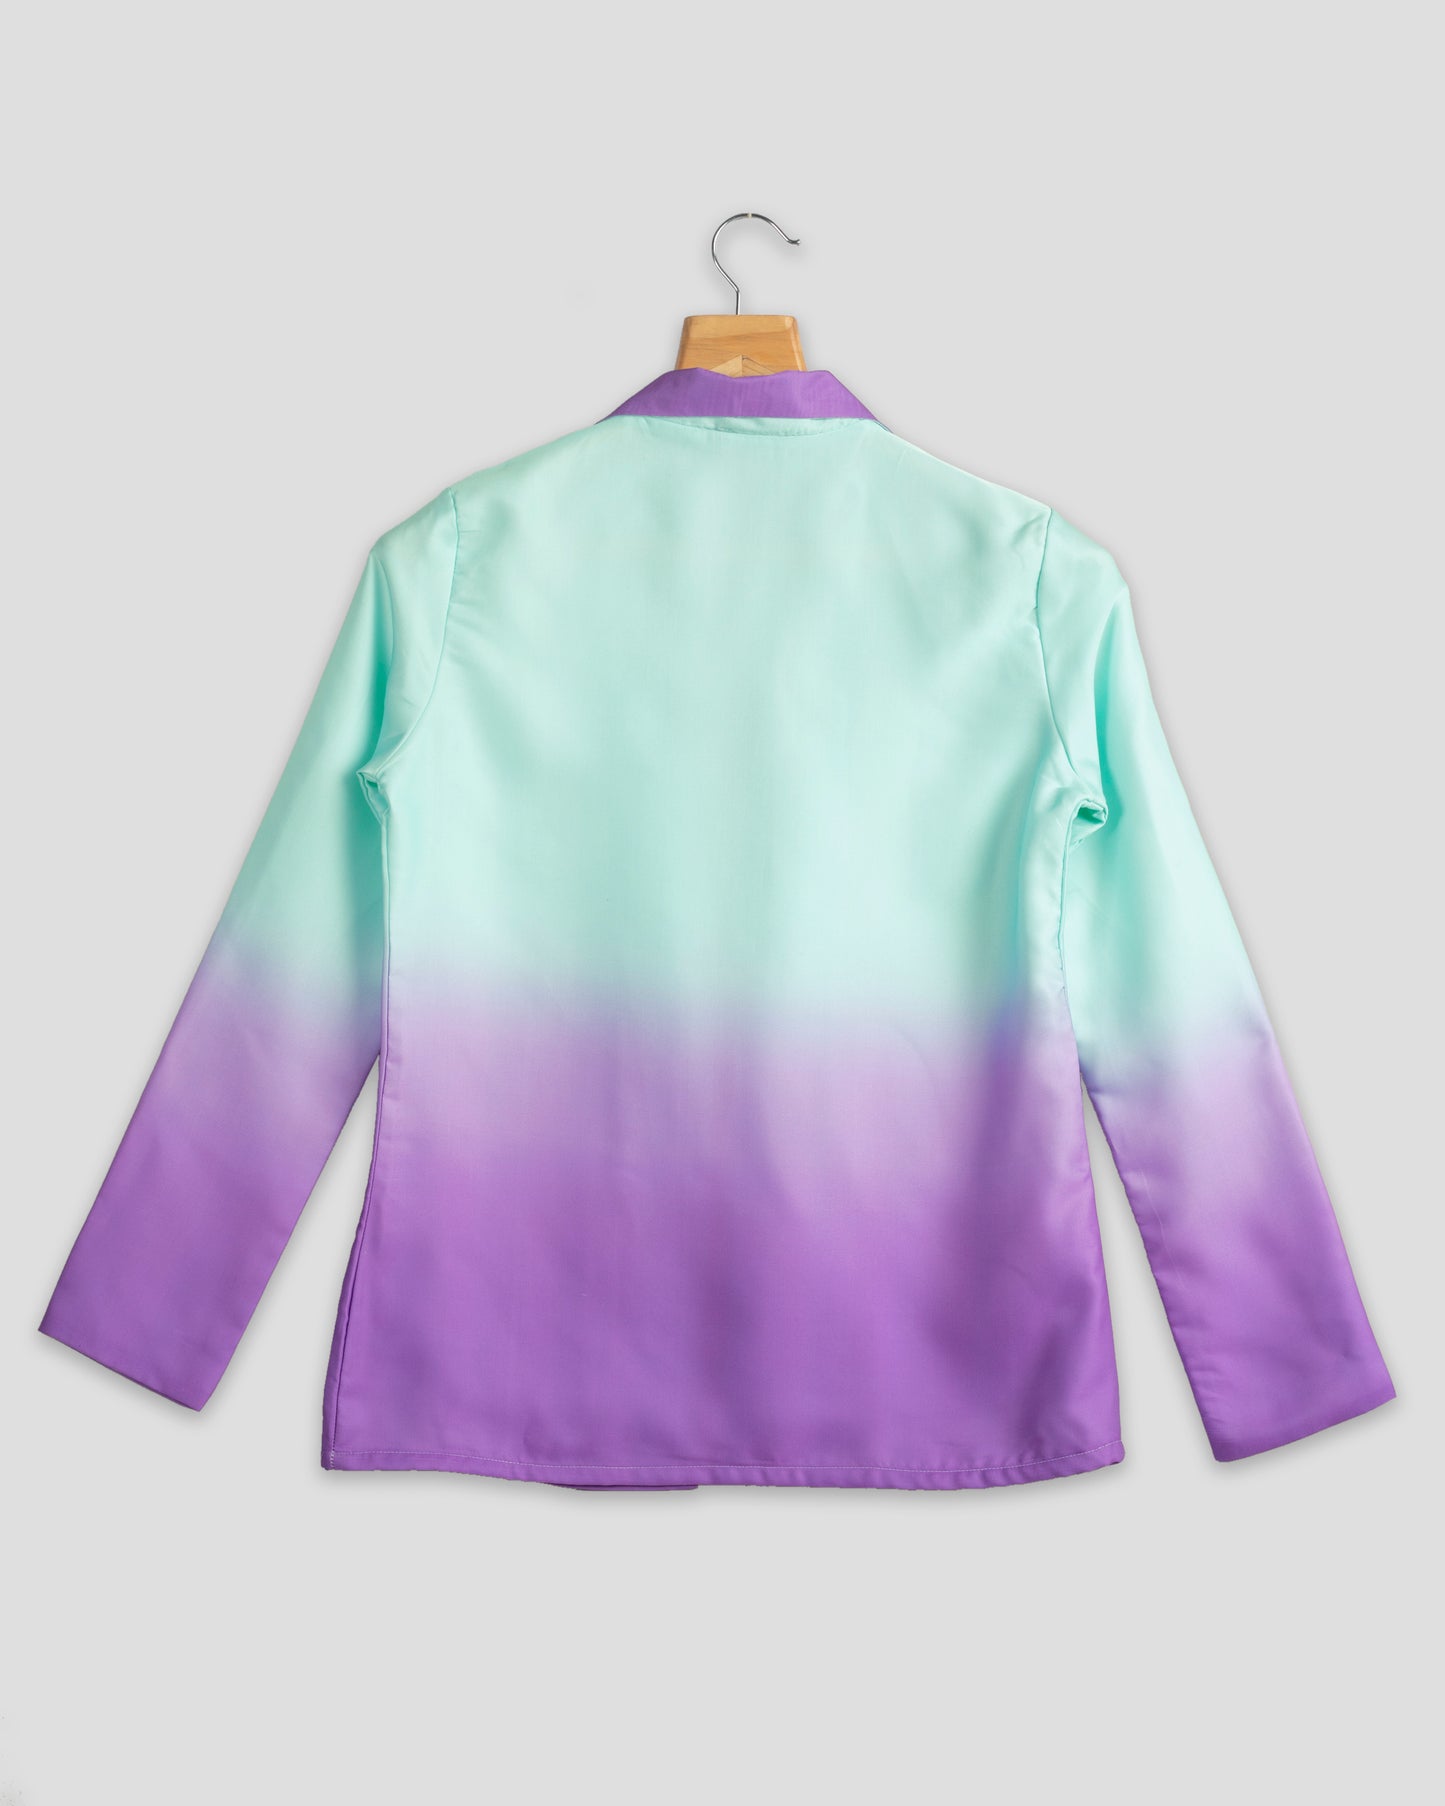 Stylish Ombre Jacket For Women